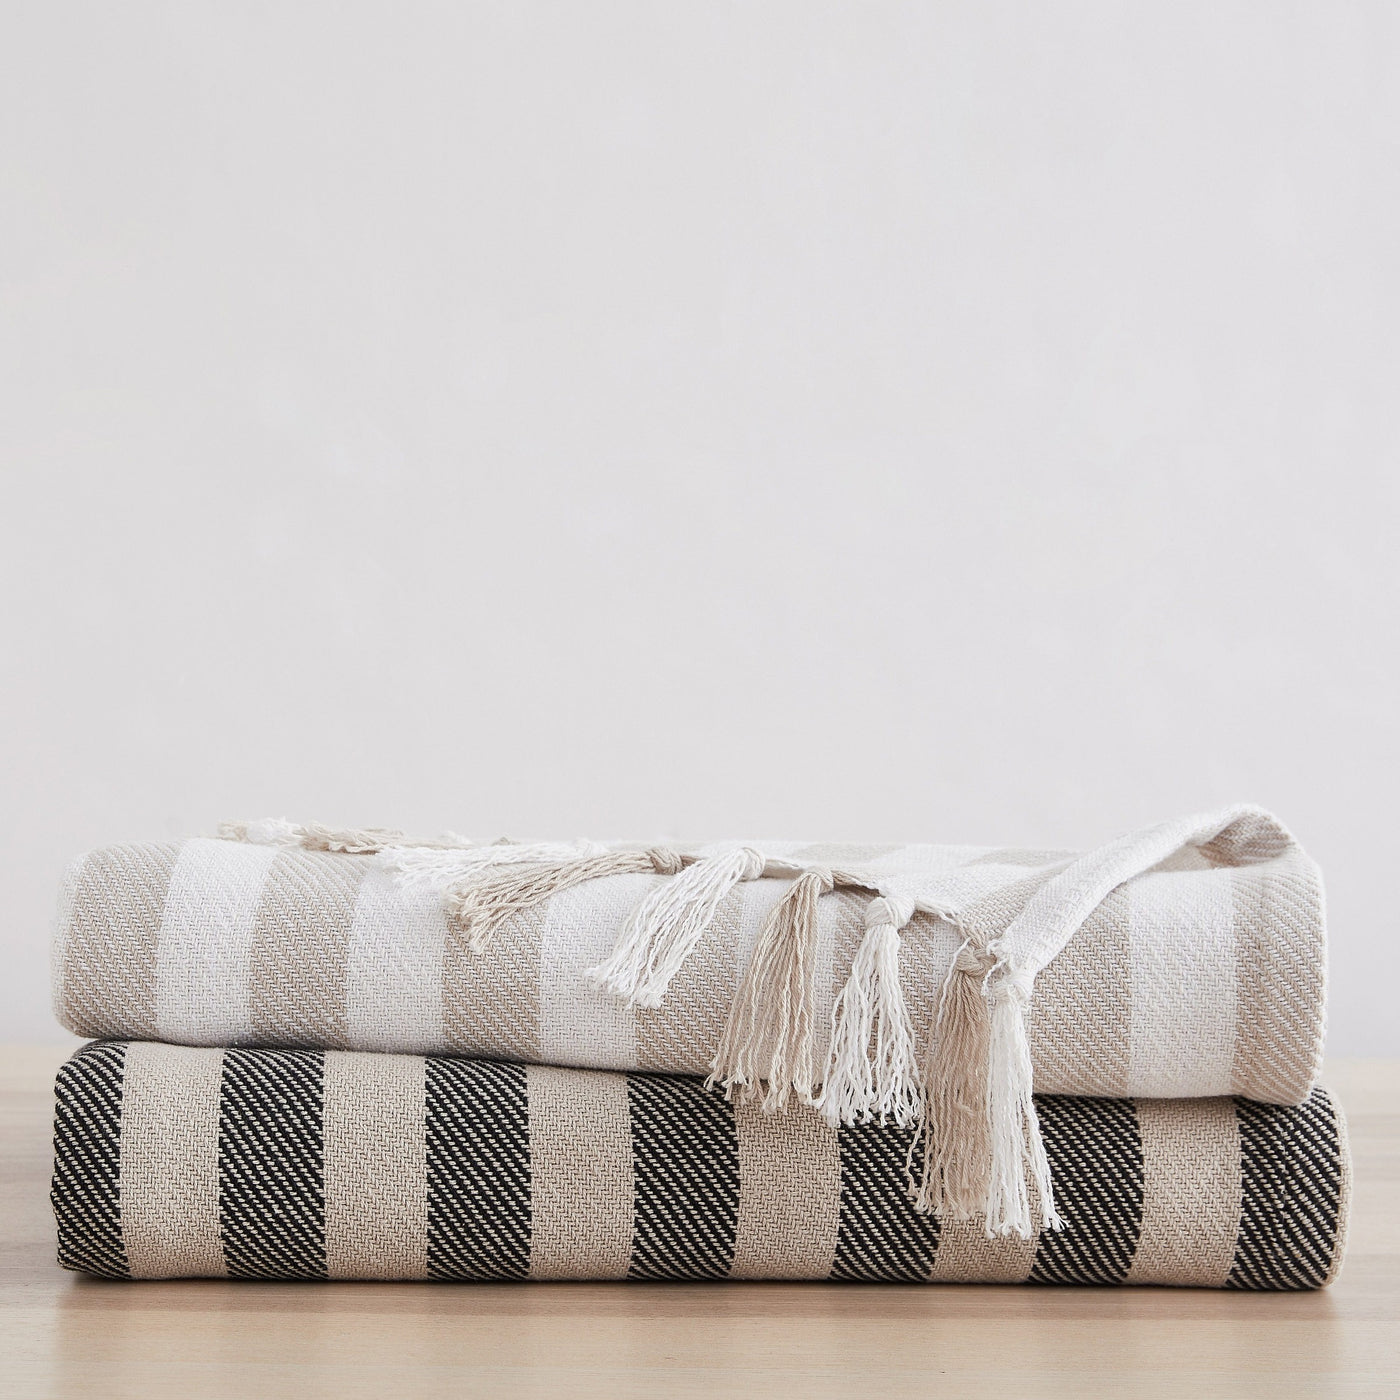 Striped Cotton Blankets and Throws in Black and Taupe Stack Together#color_striped-black